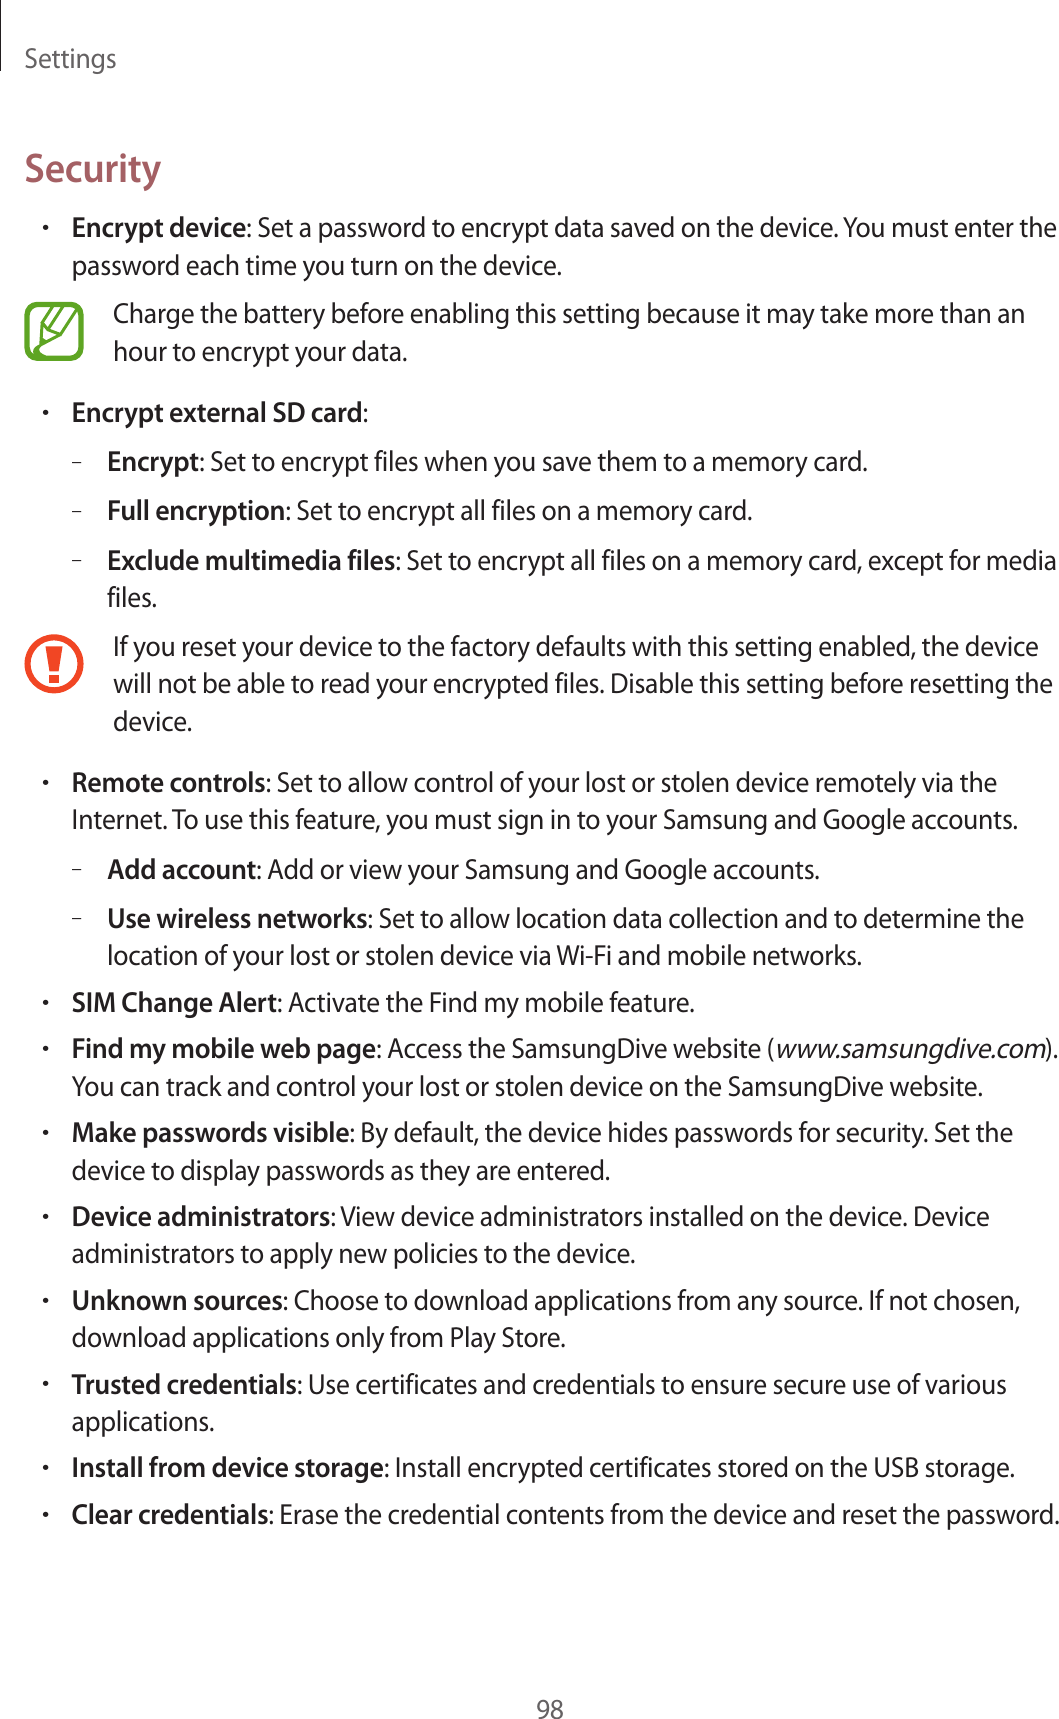 Settings98Security•Encrypt device: Set a password to encrypt data saved on the device. You must enter the password each time you turn on the device.Charge the battery before enabling this setting because it may take more than an hour to encrypt your data.•Encrypt external SD card:–Encrypt: Set to encrypt files when you save them to a memory card.–Full encryption: Set to encrypt all files on a memory card.–Exclude multimedia files: Set to encrypt all files on a memory card, except for media files.If you reset your device to the factory defaults with this setting enabled, the device will not be able to read your encrypted files. Disable this setting before resetting the device.•Remote controls: Set to allow control of your lost or stolen device remotely via the Internet. To use this feature, you must sign in to your Samsung and Google accounts.–Add account: Add or view your Samsung and Google accounts.–Use wireless networks: Set to allow location data collection and to determine the location of your lost or stolen device via Wi-Fi and mobile networks.•SIM Change Alert: Activate the Find my mobile feature.•Find my mobile web page: Access the SamsungDive website (www.samsungdive.com). You can track and control your lost or stolen device on the SamsungDive website.•Make passwords visible: By default, the device hides passwords for security. Set the device to display passwords as they are entered.•Device administrators: View device administrators installed on the device. Device administrators to apply new policies to the device.•Unknown sources: Choose to download applications from any source. If not chosen, download applications only from Play Store.•Trusted credentials: Use certificates and credentials to ensure secure use of various applications.•Install from device storage: Install encrypted certificates stored on the USB storage.•Clear credentials: Erase the credential contents from the device and reset the password.